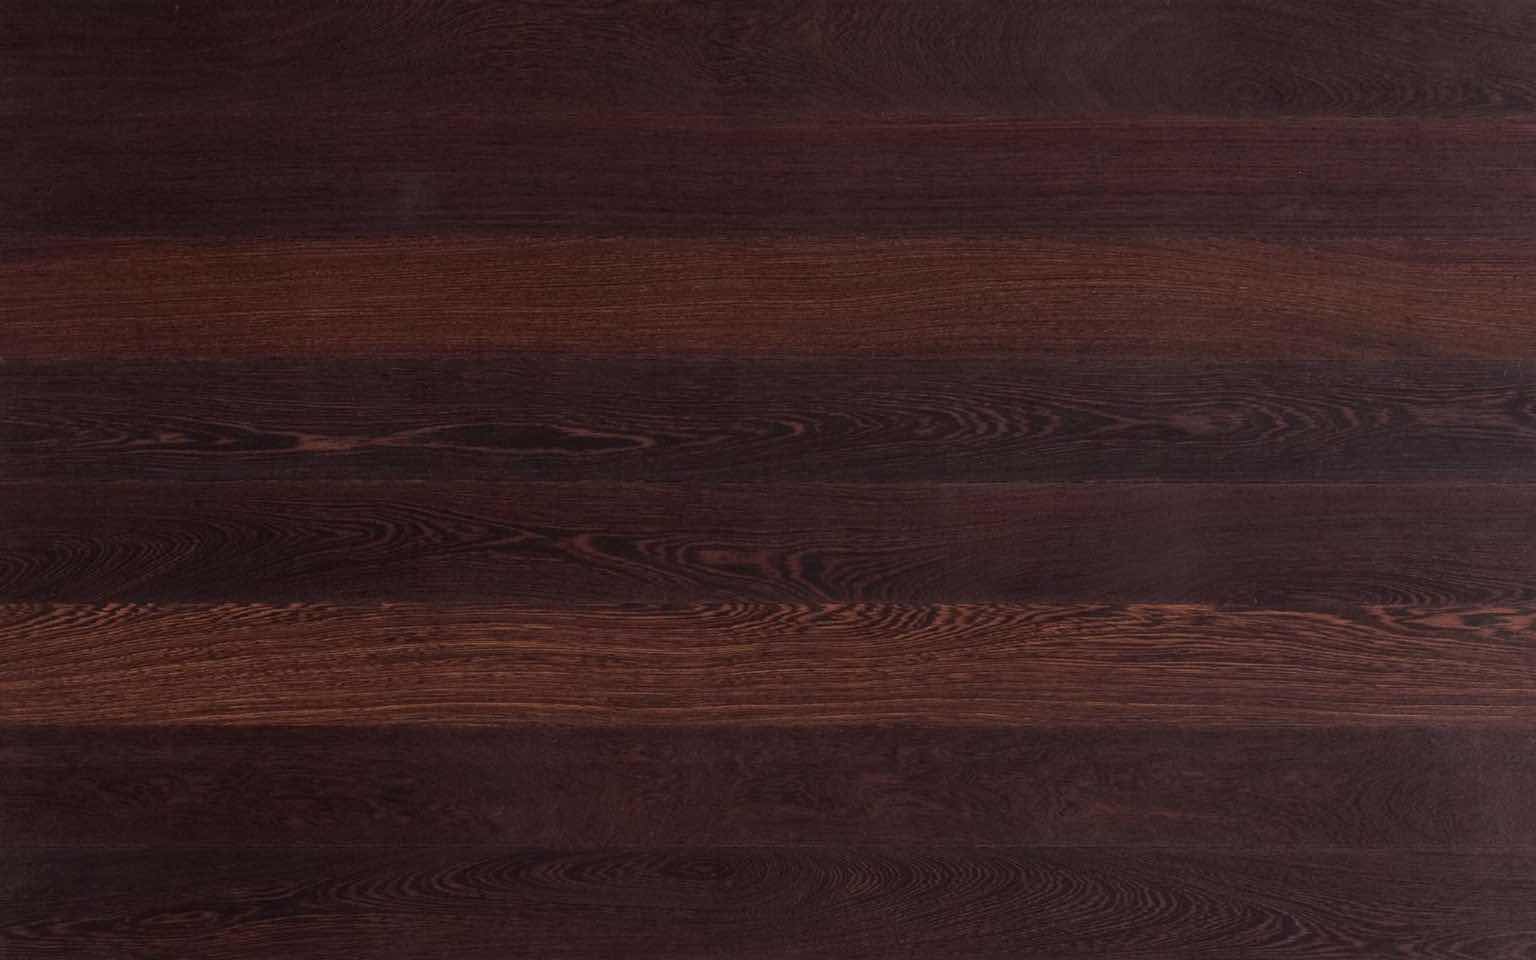 Photo 1 of LISTONE  GIORDANO WENGE WOOD FINISH SNAP ON CLICK PLANK HARDWOOD FLOORING 5” X 71” (21.65sqft PER CASE/4CASES APPROX. 98.6sqft TOTAL)